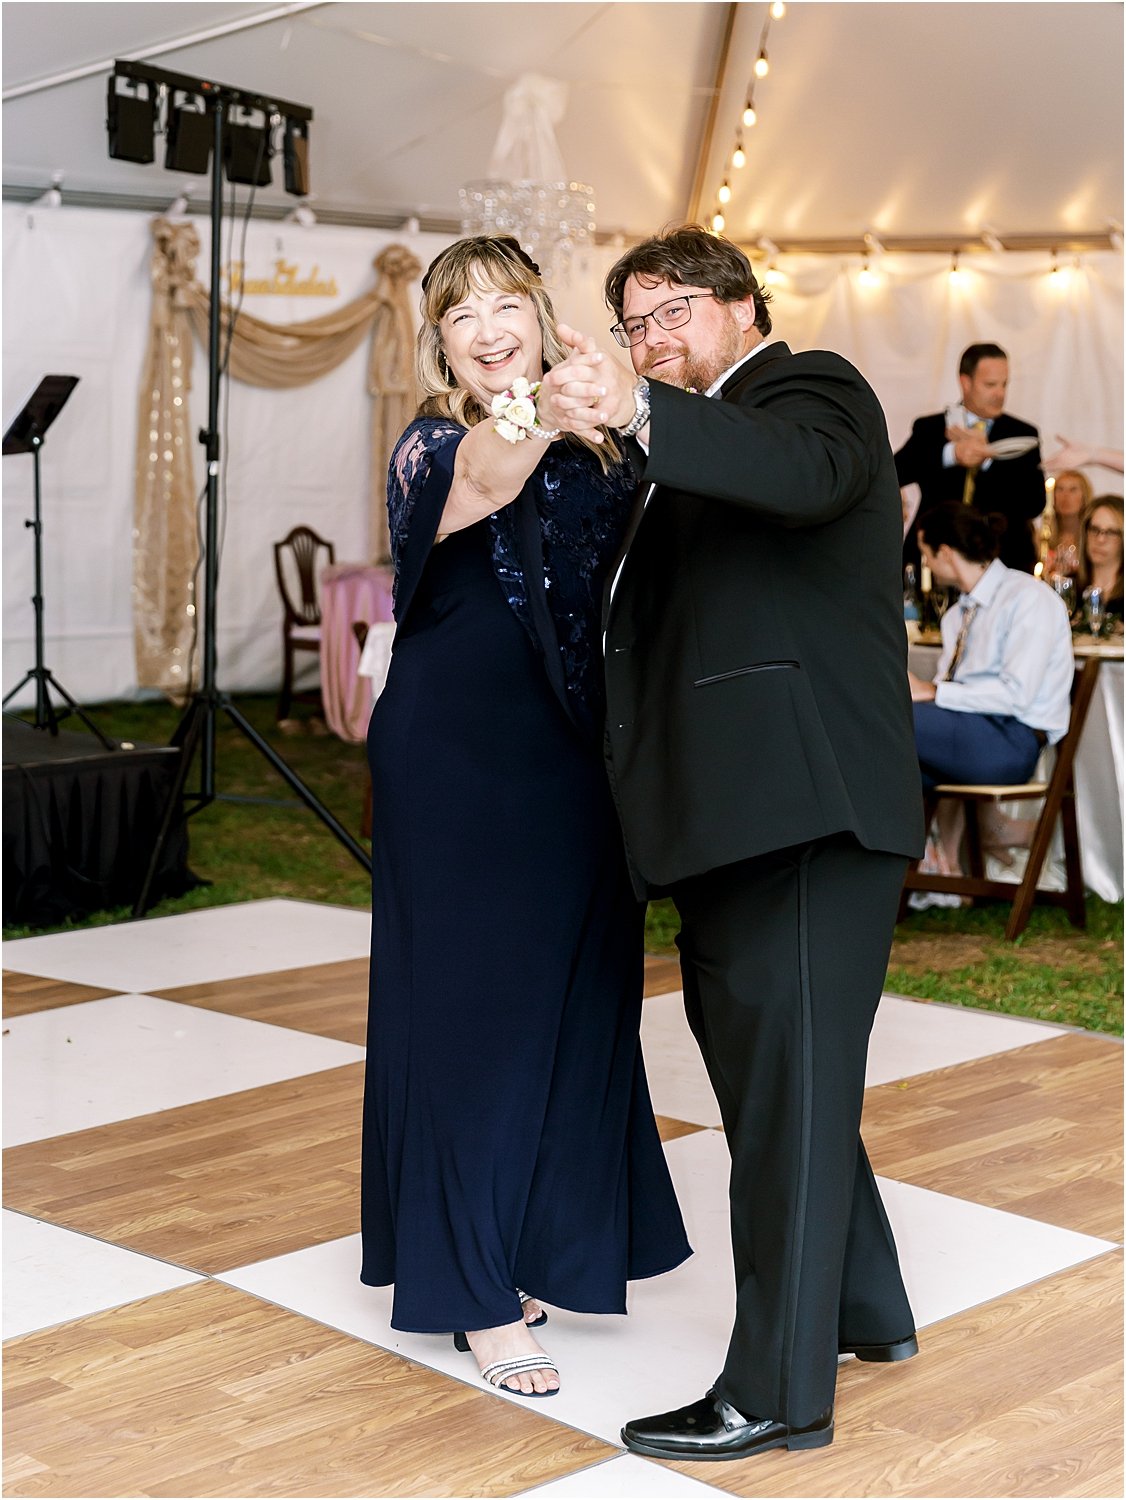 The bond of a mother and son wedding dance photo inspiration